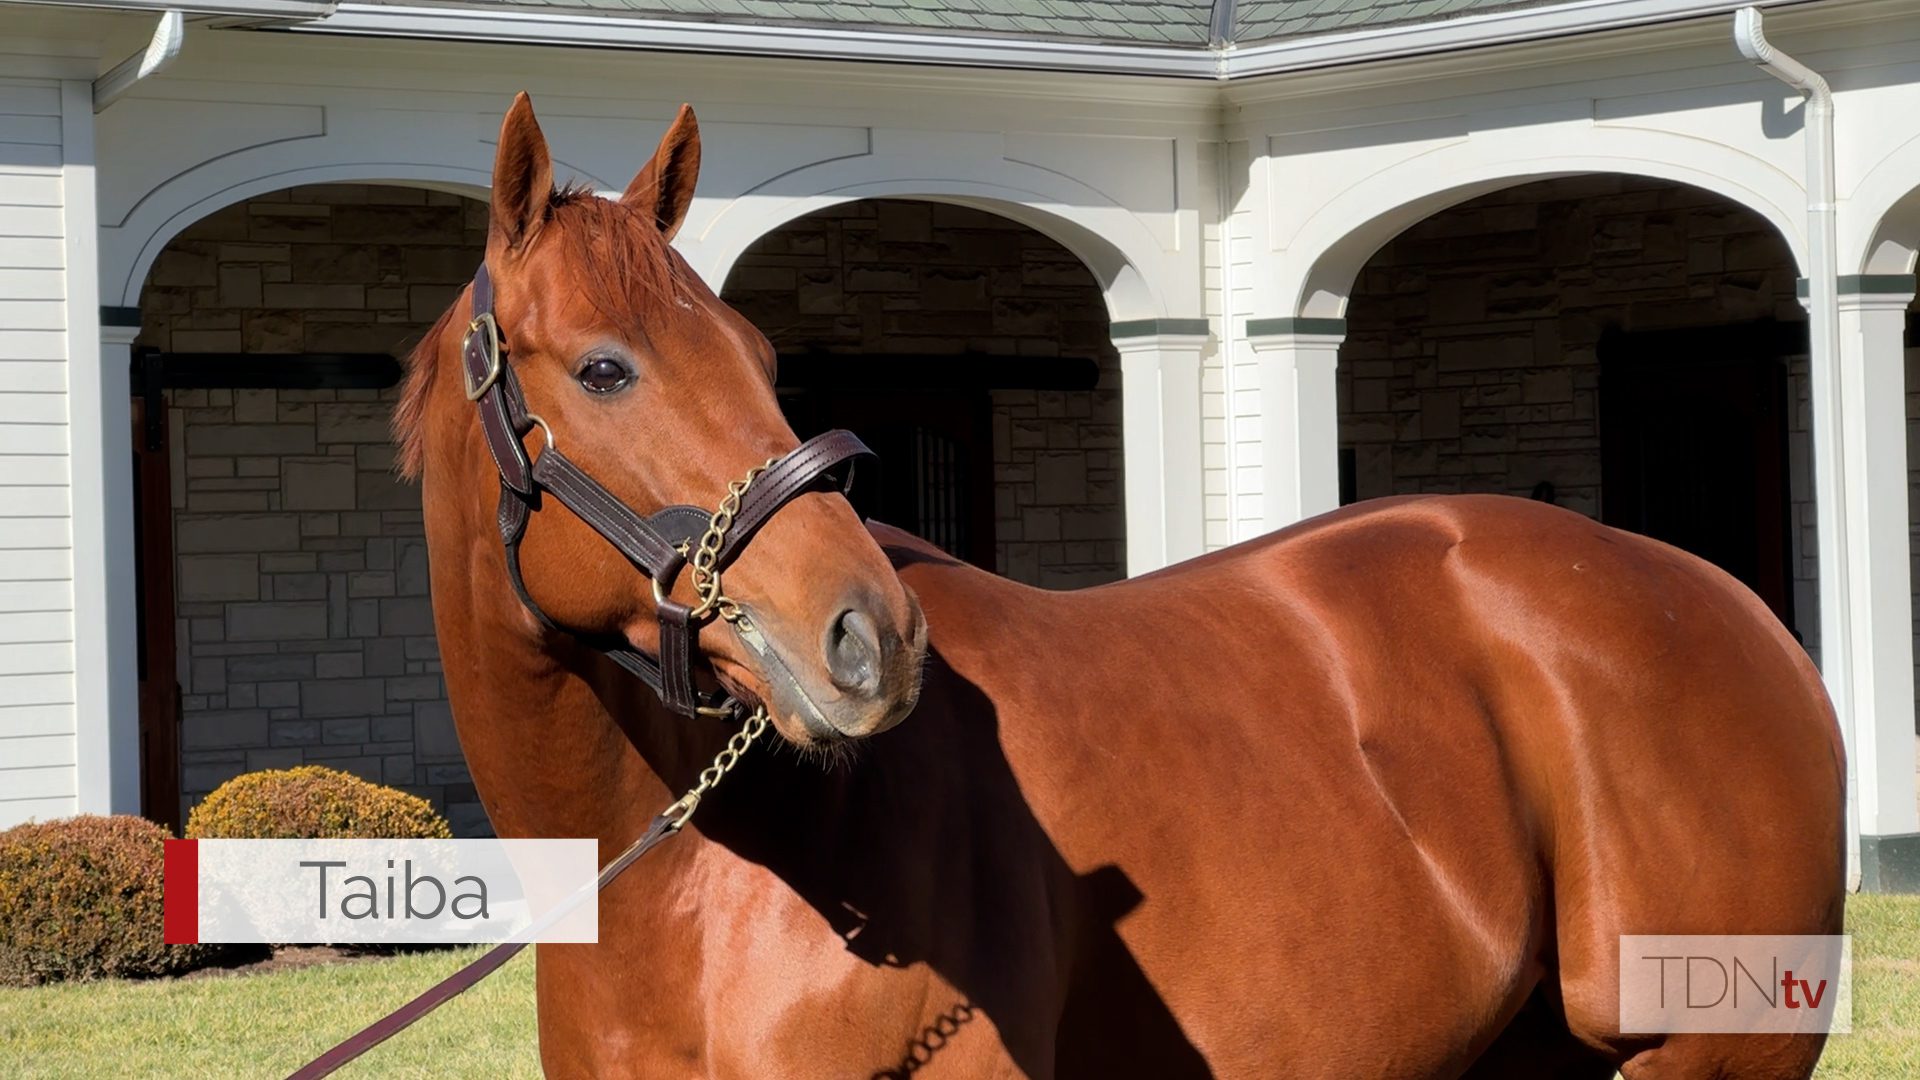 Meet the new kids on the block at Spendthrift